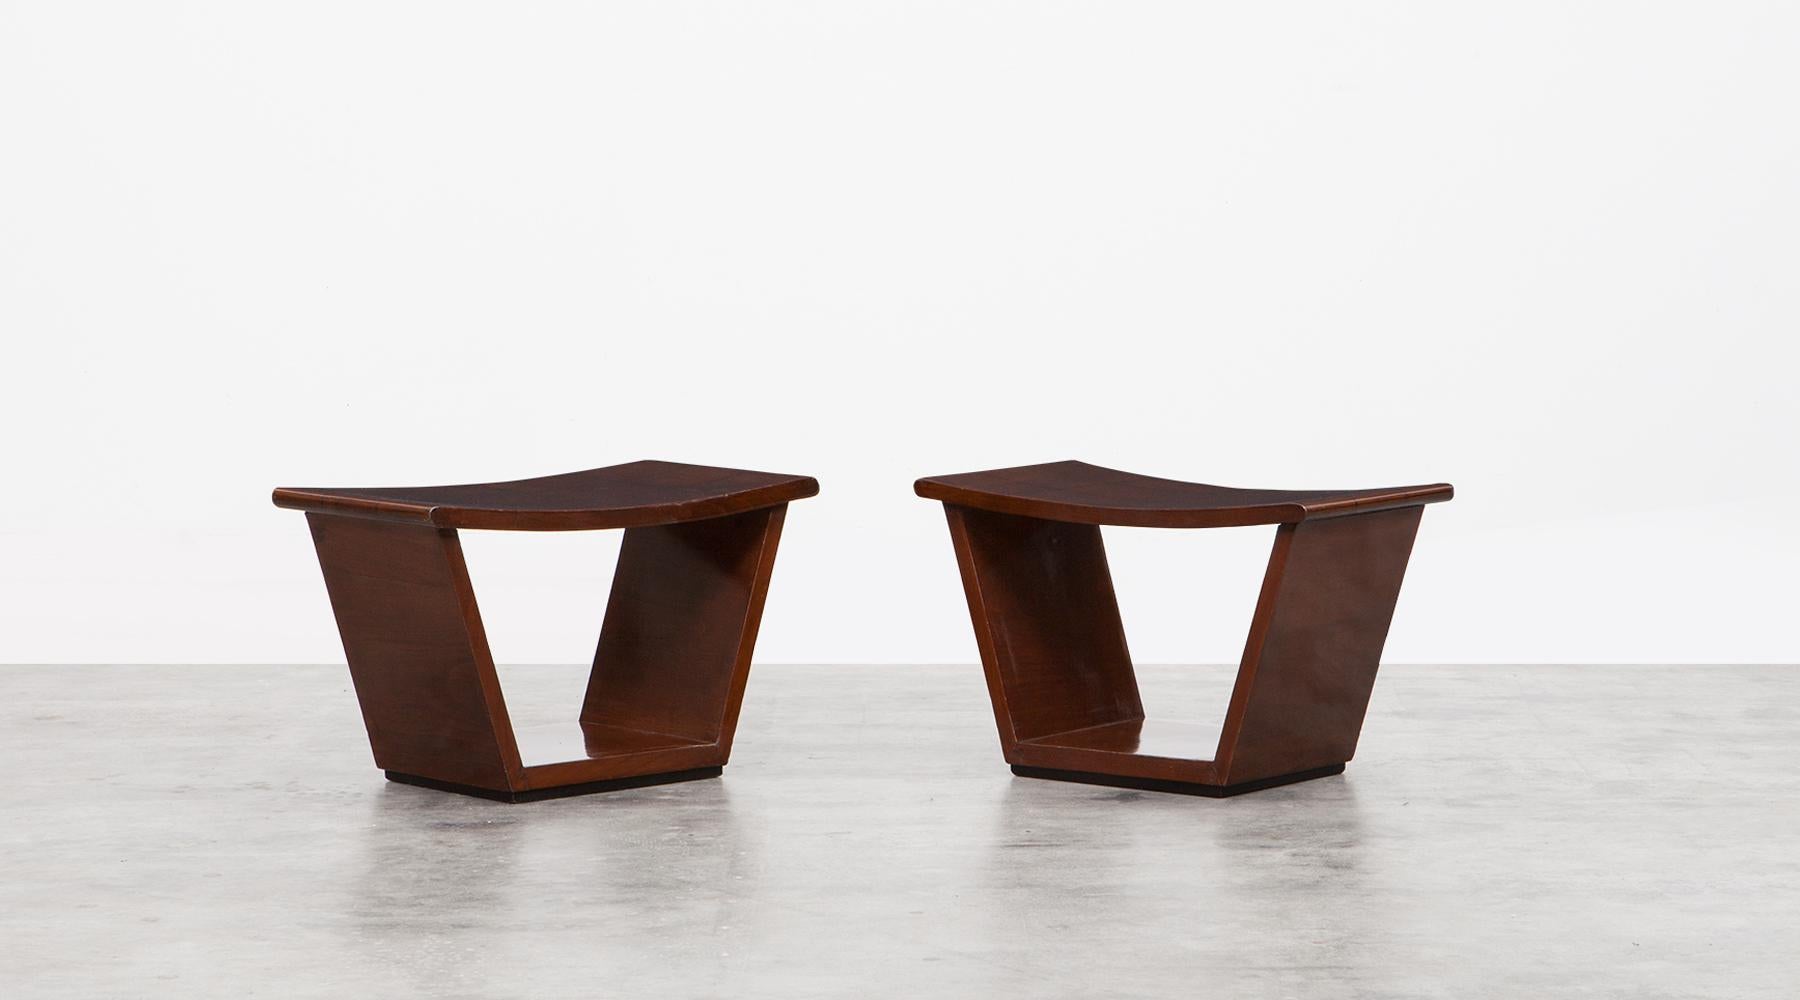 Wooden pair of stools by Osvaldo Borsani, Italy, 1930.

This beautiful pair of Osvaldo Borsani stools is reworked. The original varnish is still in very good shape and has been hand polished to get the old shiny look from back in the days. This